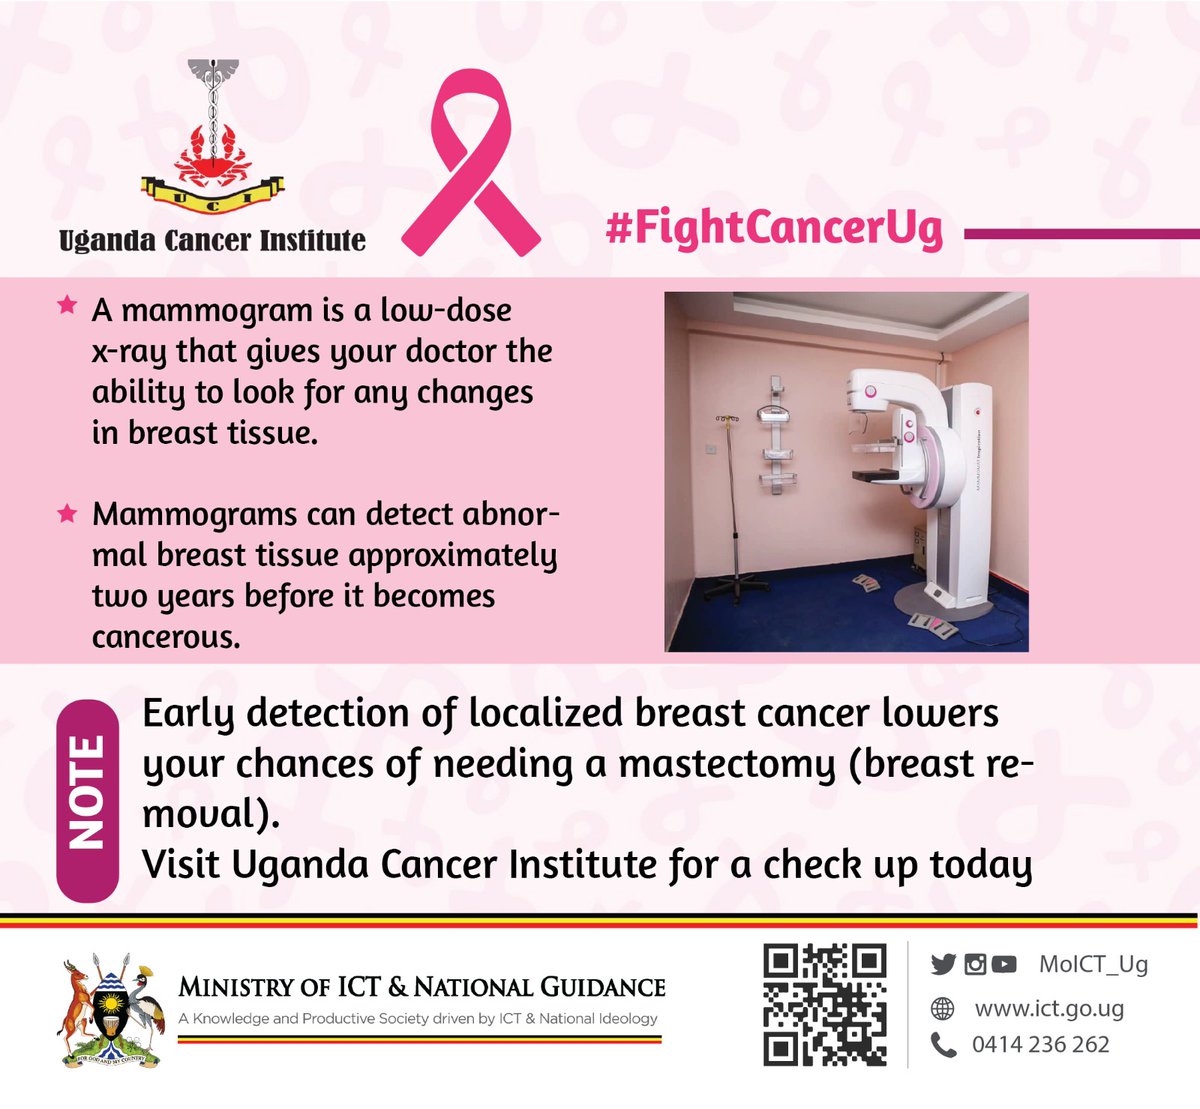 Early diagnosis of cancer focuses on detecting symptomatic patients as early as possible so they have the best chance for successful treatment. #FightCancerUg @MinofHealthUG @GovUganda @HealthUg @MoICT_Ug @DMU_Uganda